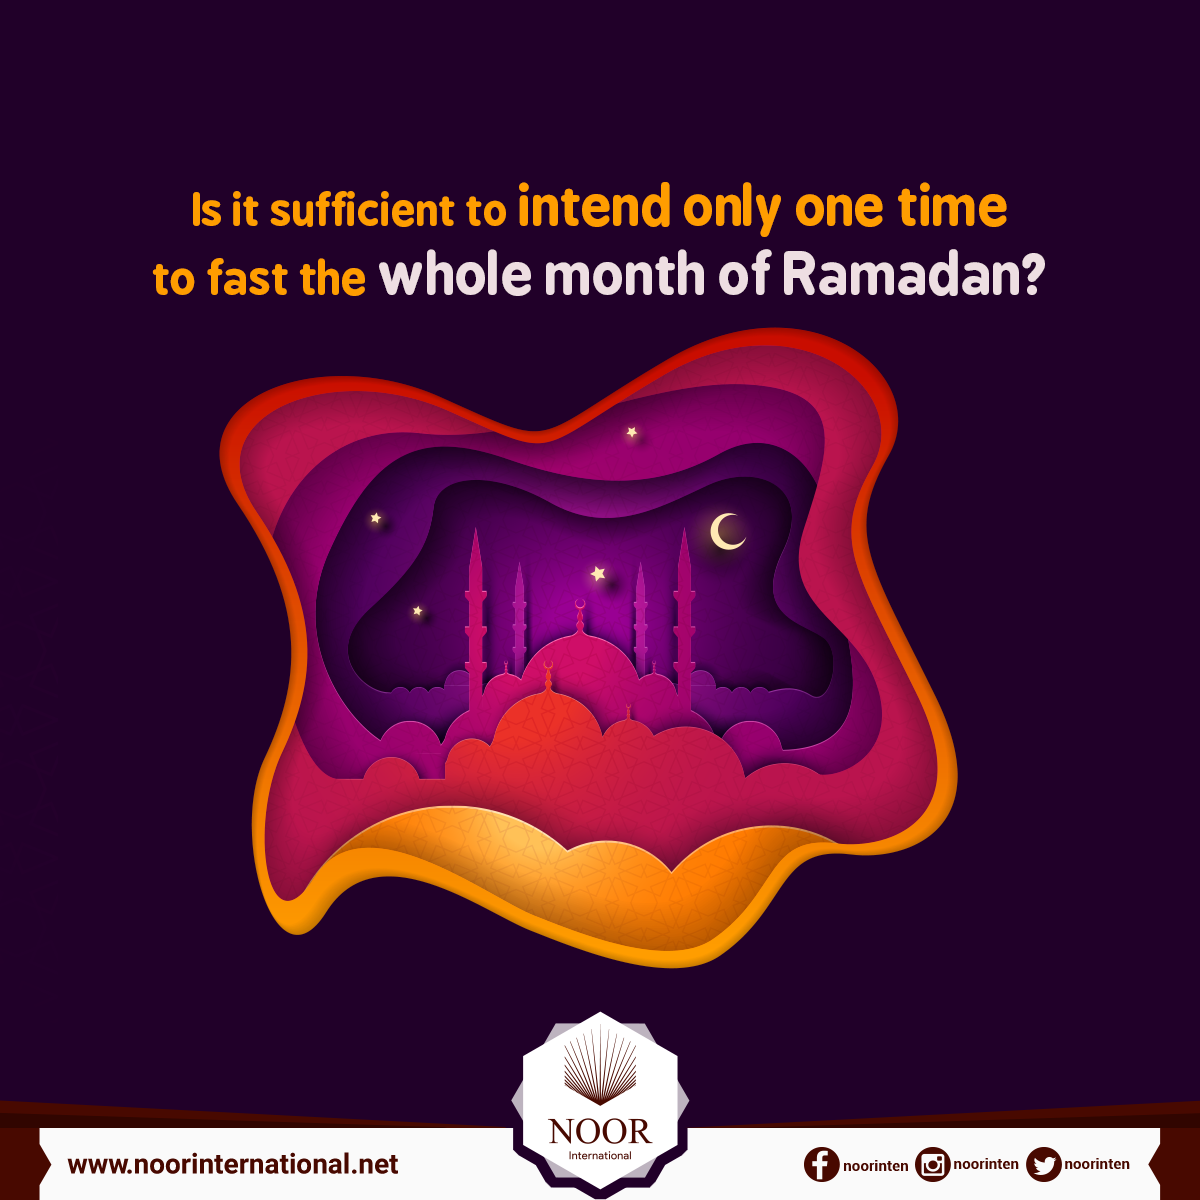 Is it sufficient to intend only one time to fast the whole month of Ramadan?